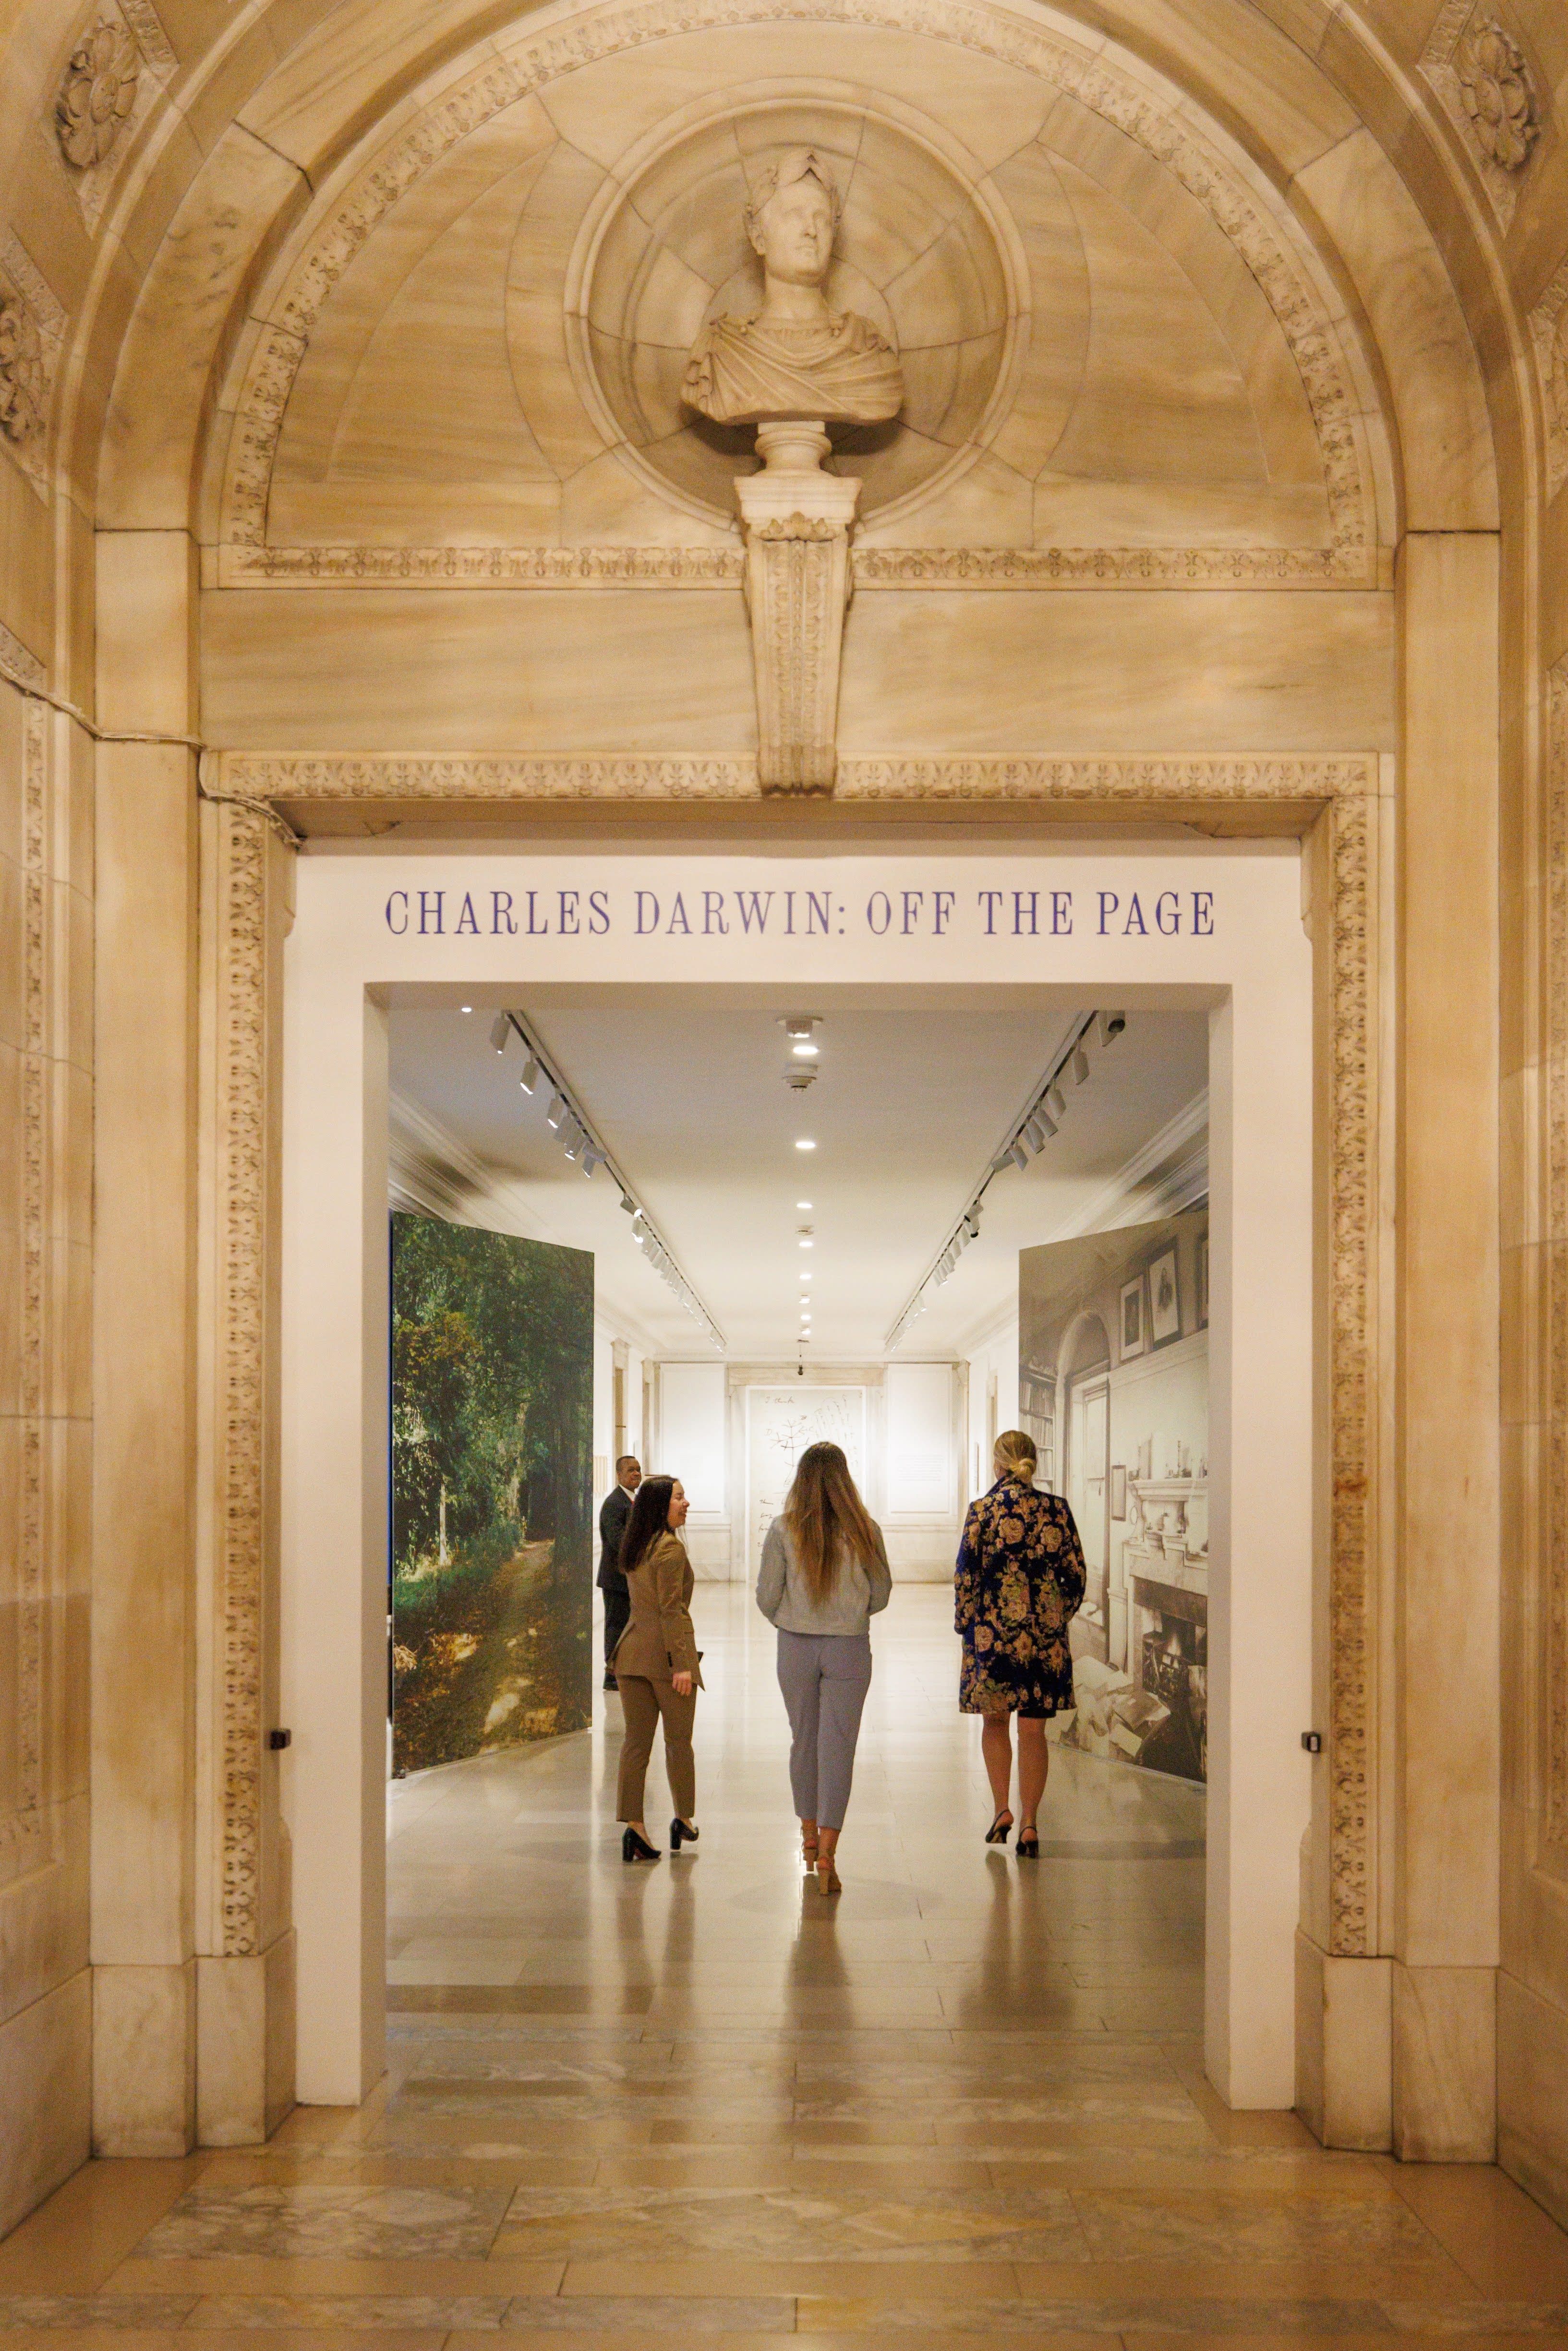 Charles Darwin: Off the Page' exhibition at The New York Public Library